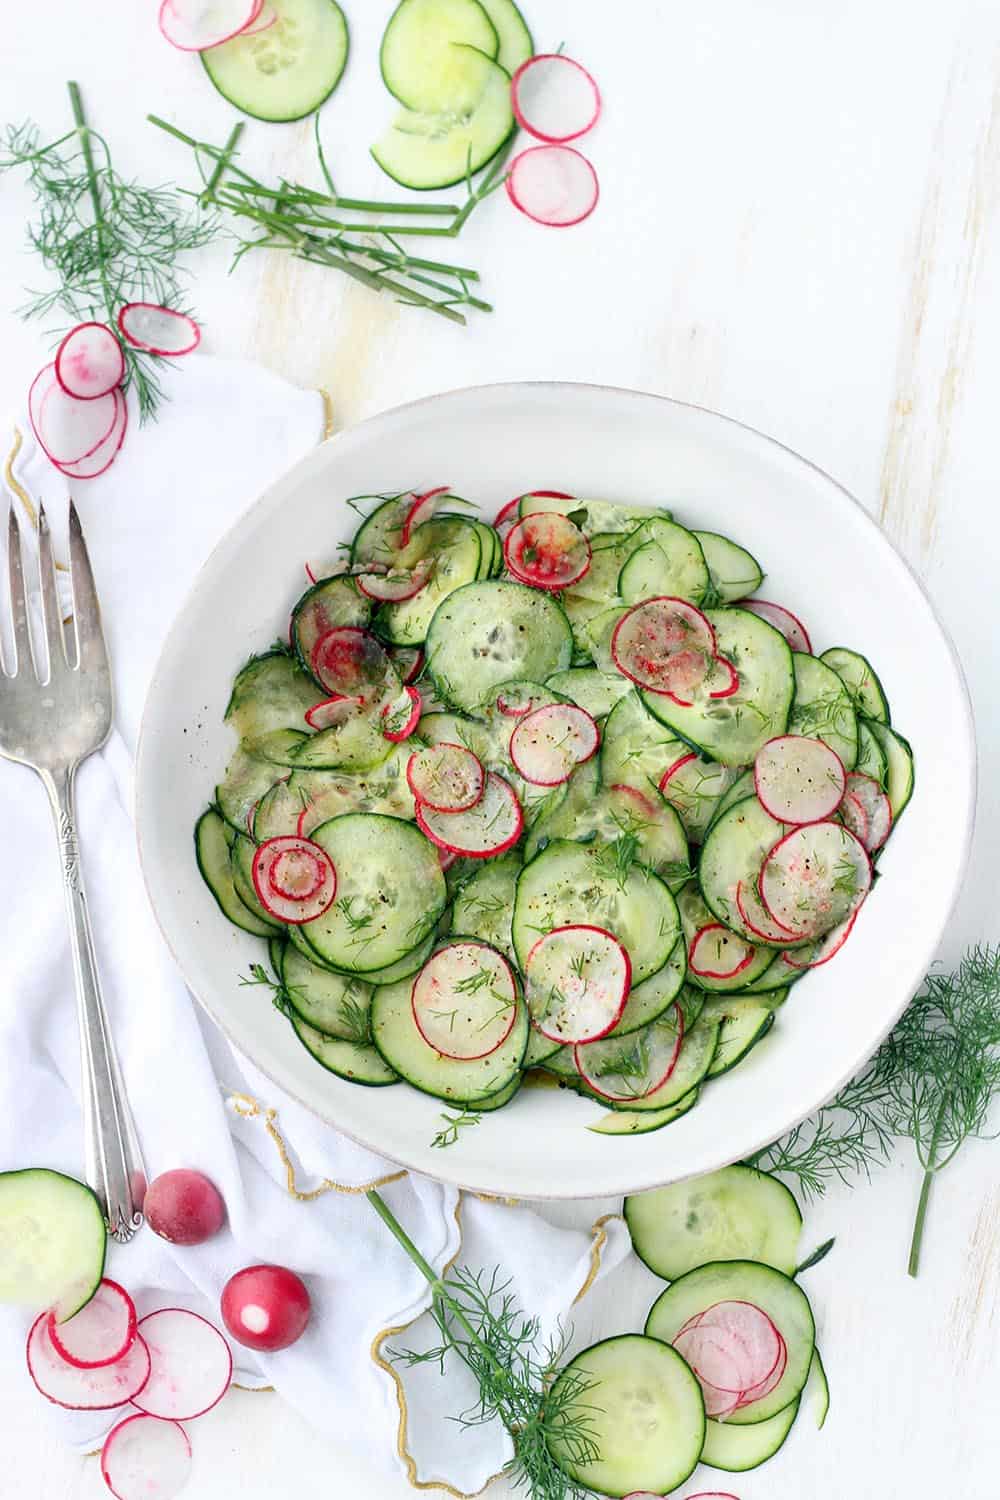 This Cucumber and Radish Salad with Dill is dressed in a sweet and tangy red wine vinaigrette and is addicting! A perfect low-carb, refreshing side that can easily be made ahead of time. 